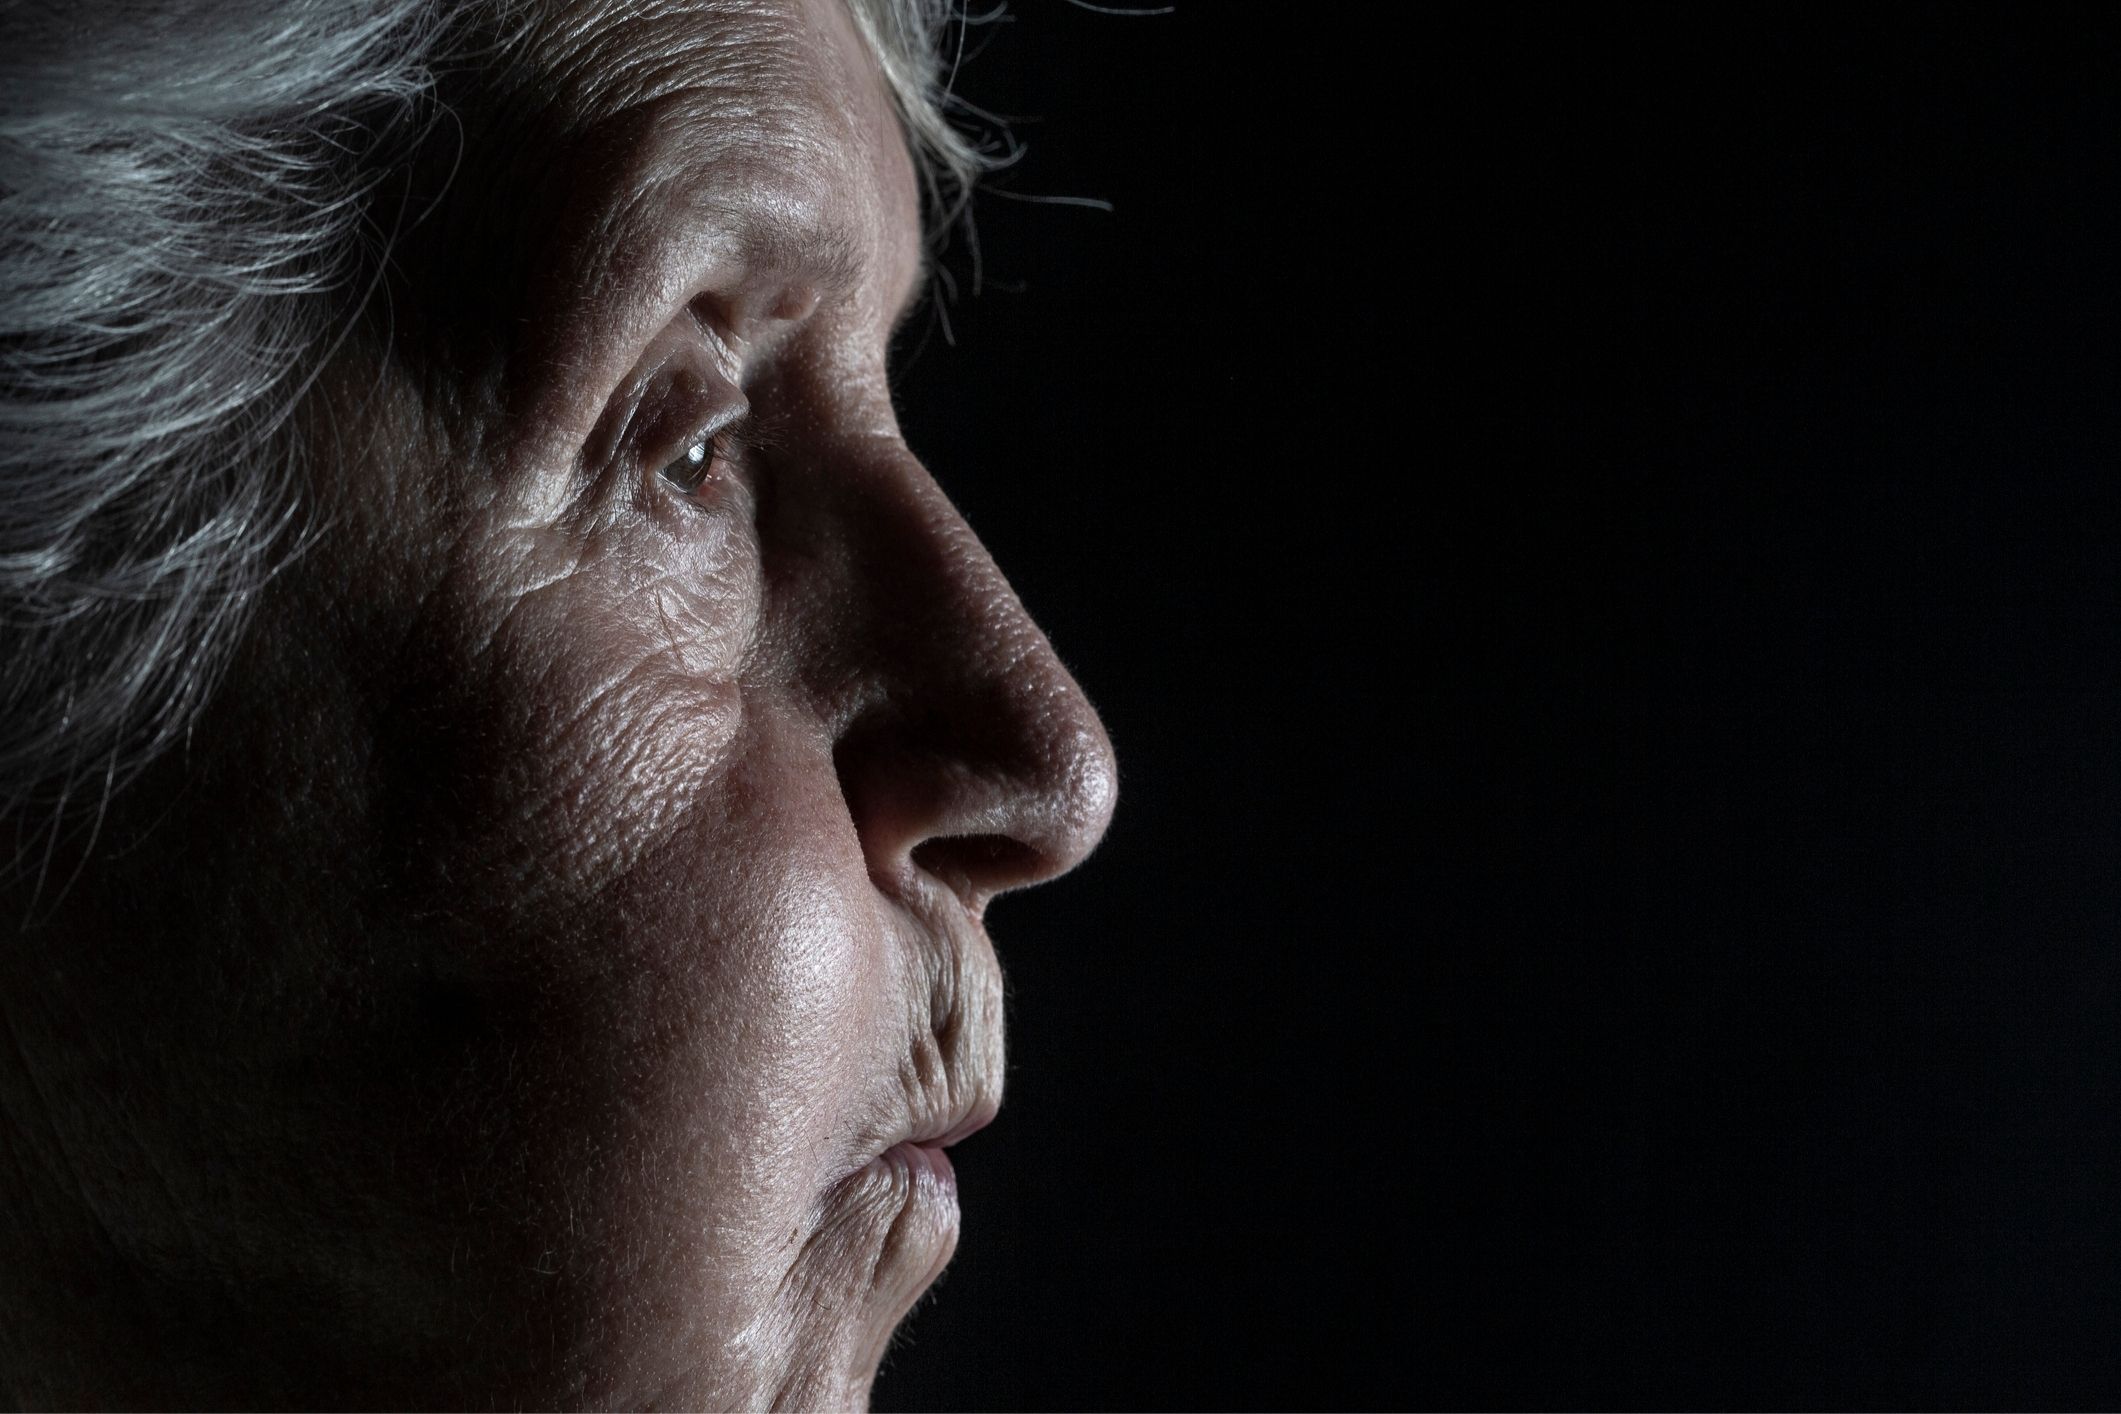 How do you know if it’s elder abuse?